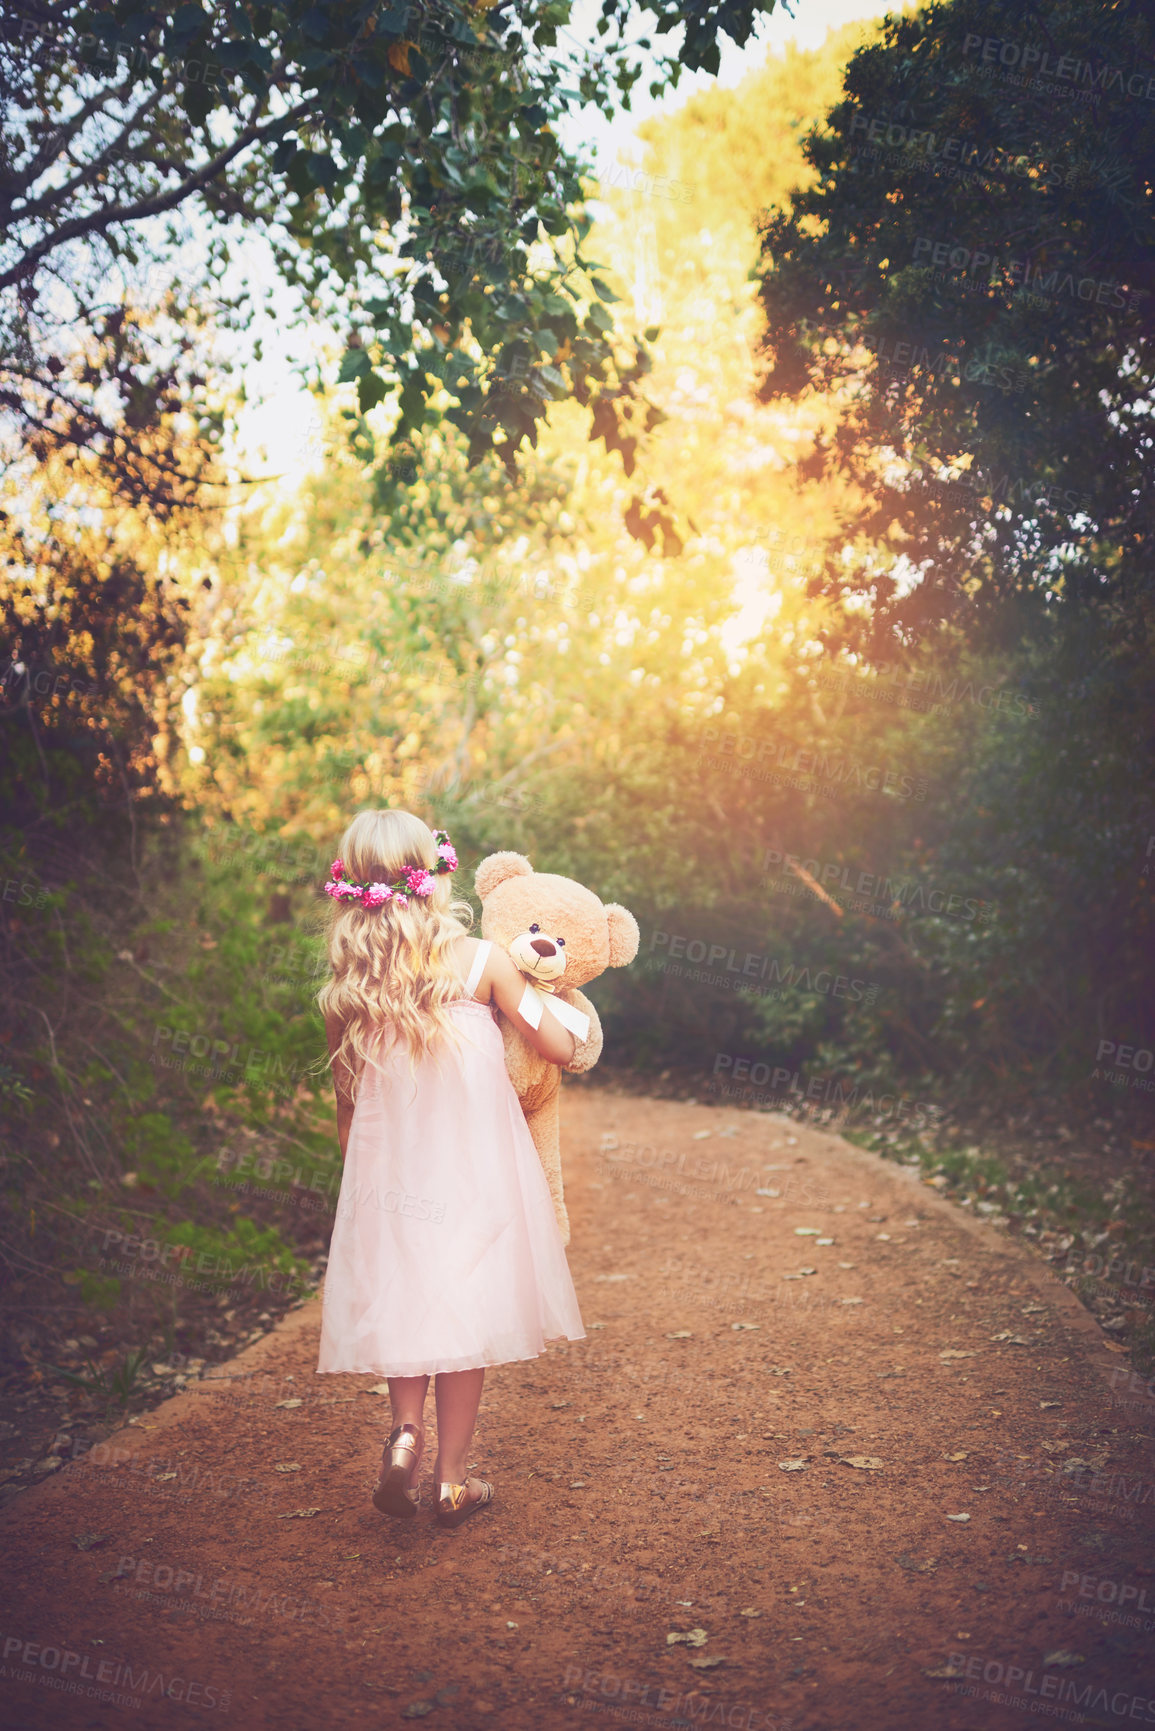 Buy stock photo Shot of a unrecognizable little girl walking with her teddy bear in the middle of a dirt road